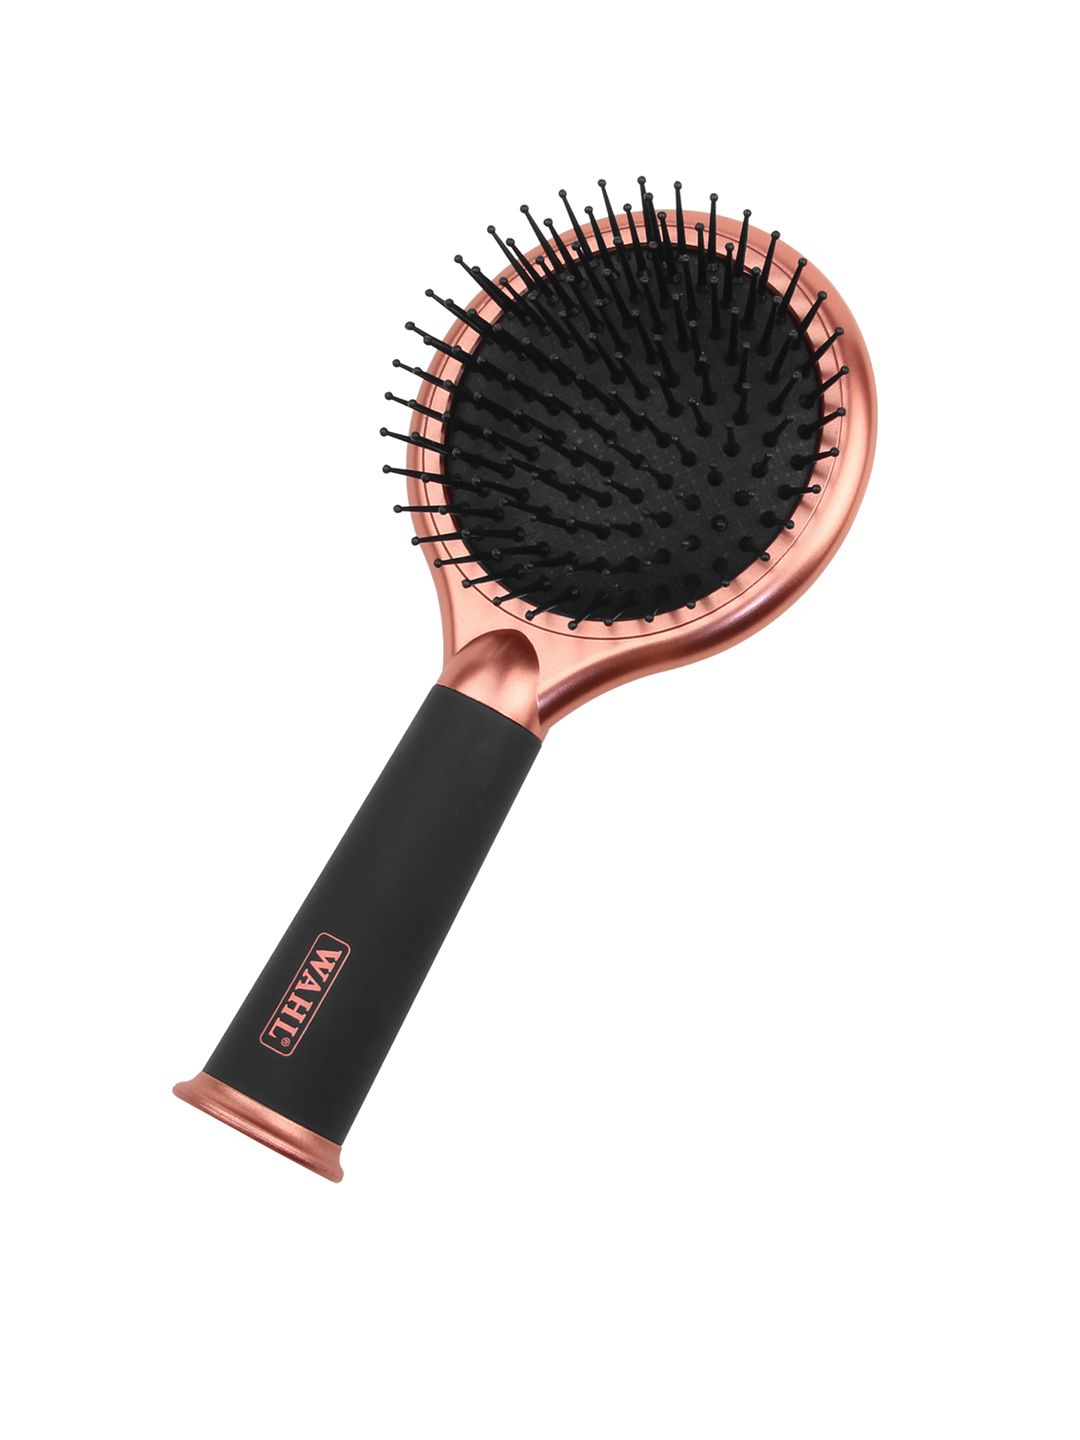 WAHL Black & Rose Gold 3 in 1 Hair Brush with Mirror and Storage Handle